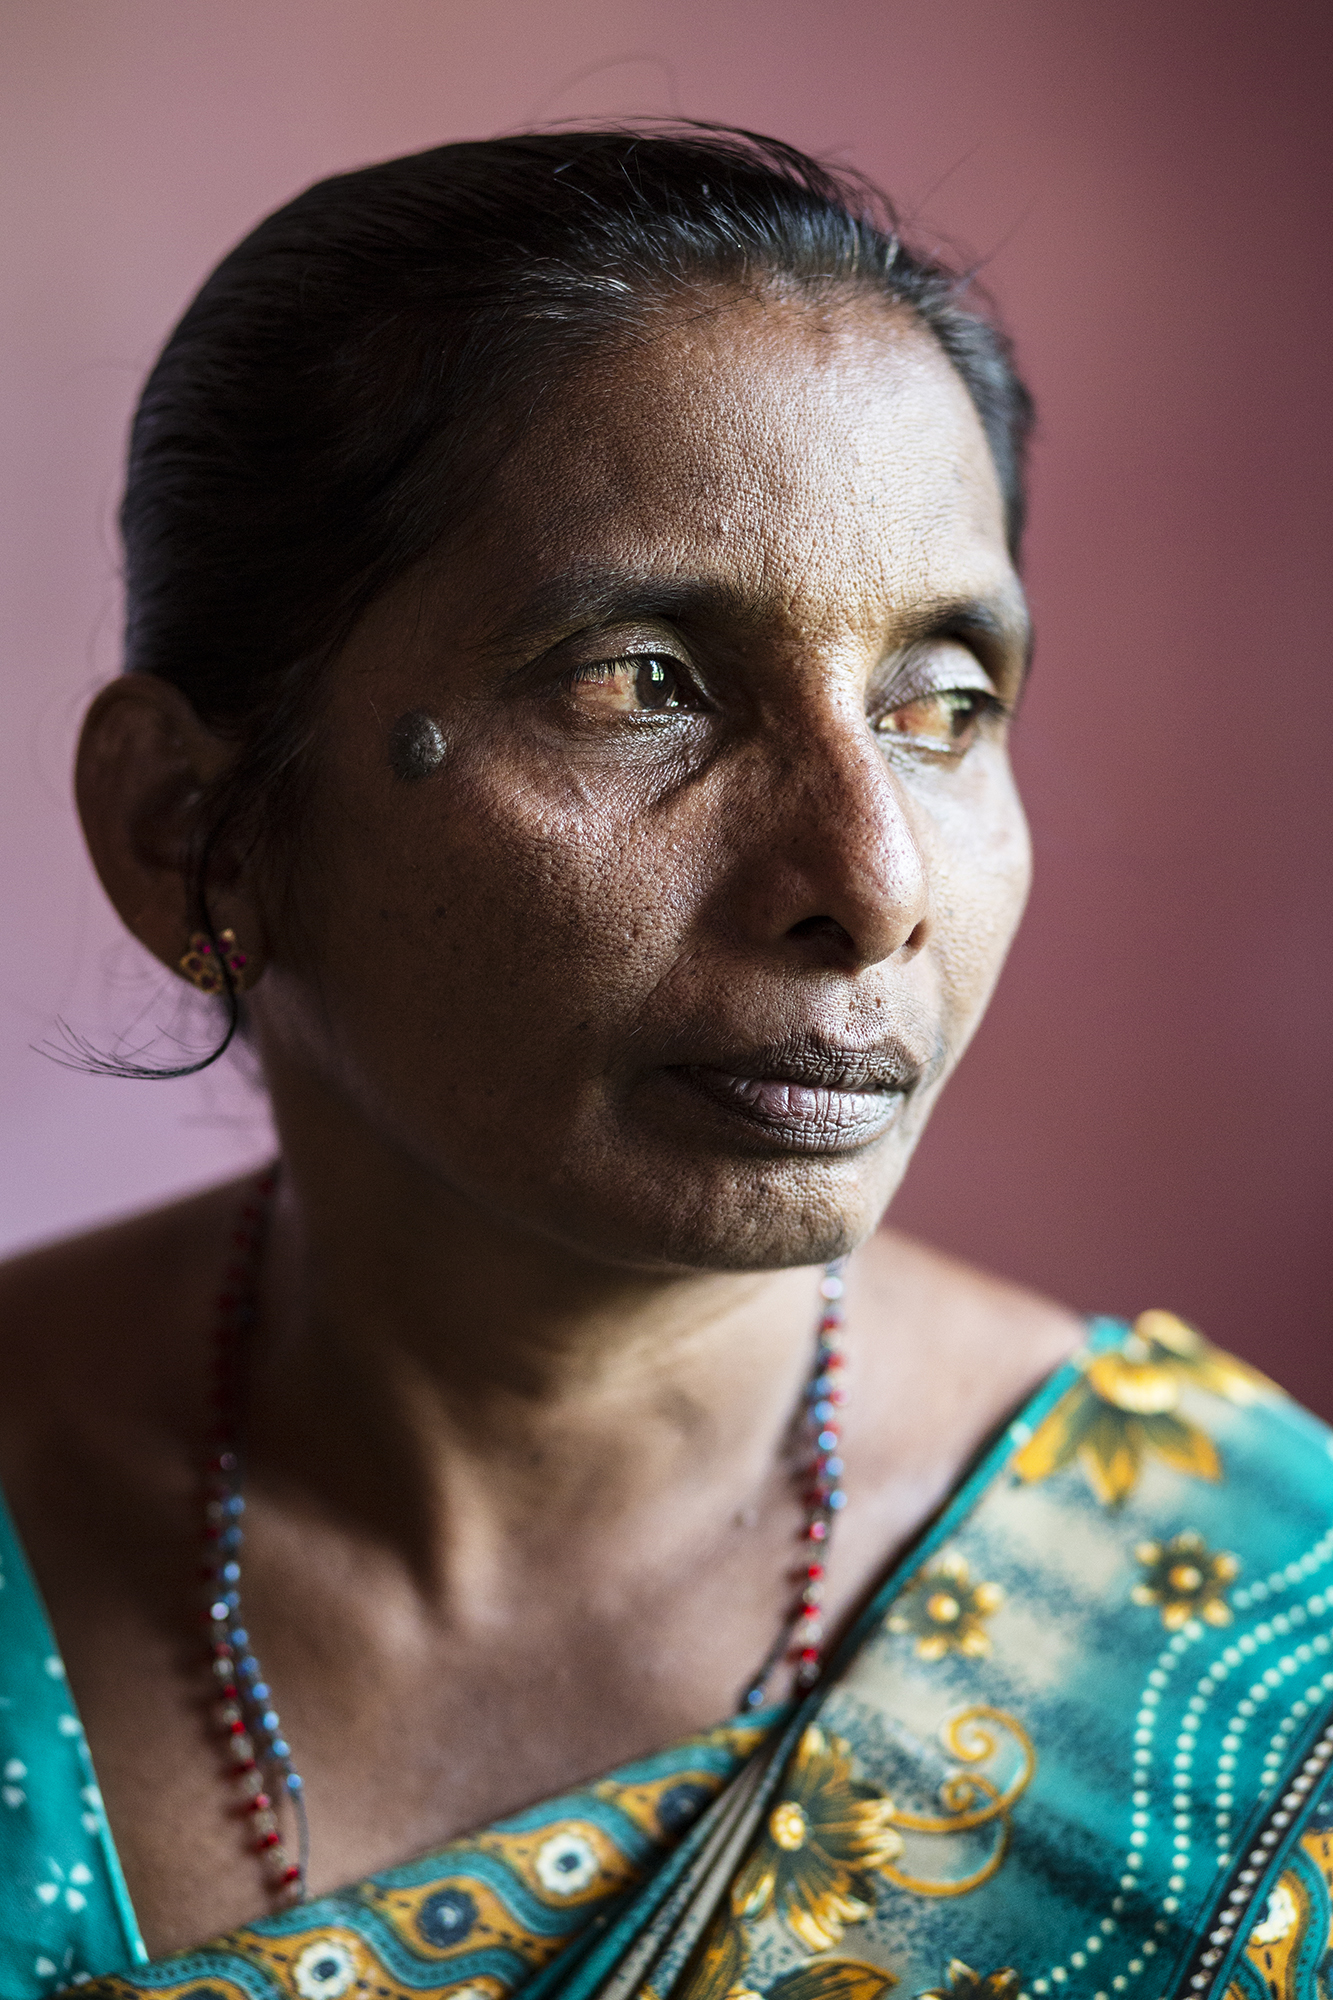  Mary, 52. Mary's 14 year old daughter disappeared in 2007 after being captured by the Sri Lankan army. Mary has not seen her daughter since.  "I'm tired of telling my story. I'm not the only one who's going through this, not knowing where our loved 